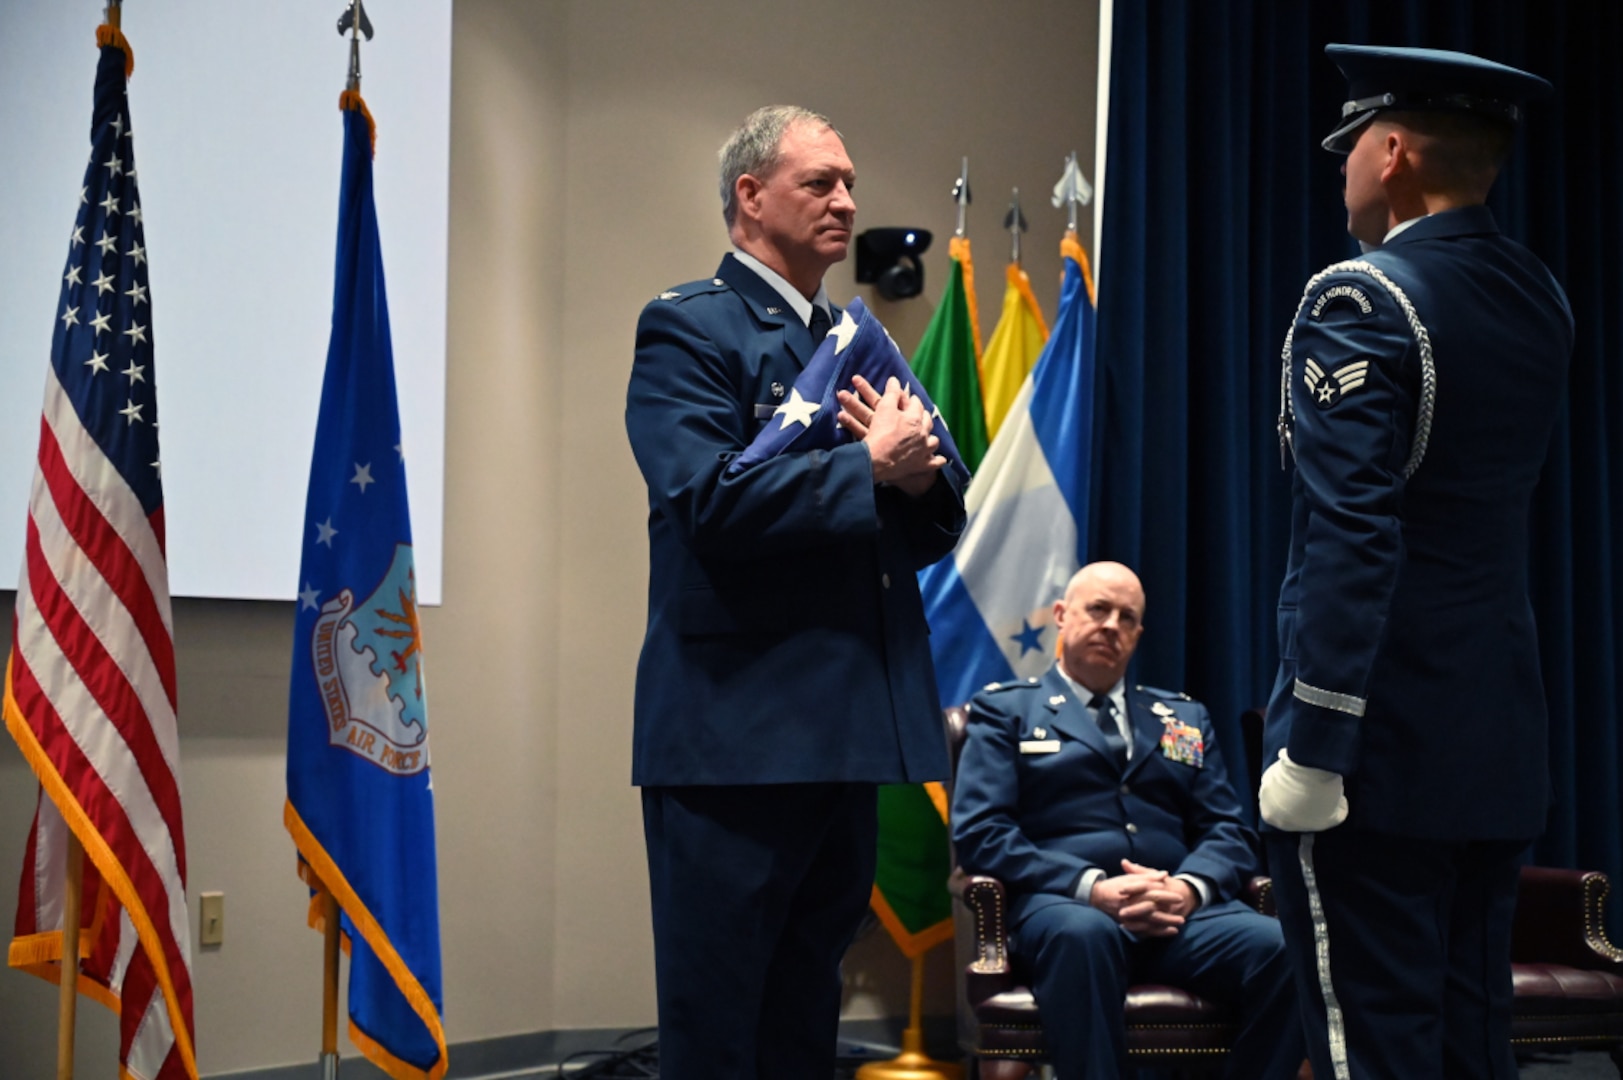 433rd Airlift Wing Commander Retires After 33 Years of Service